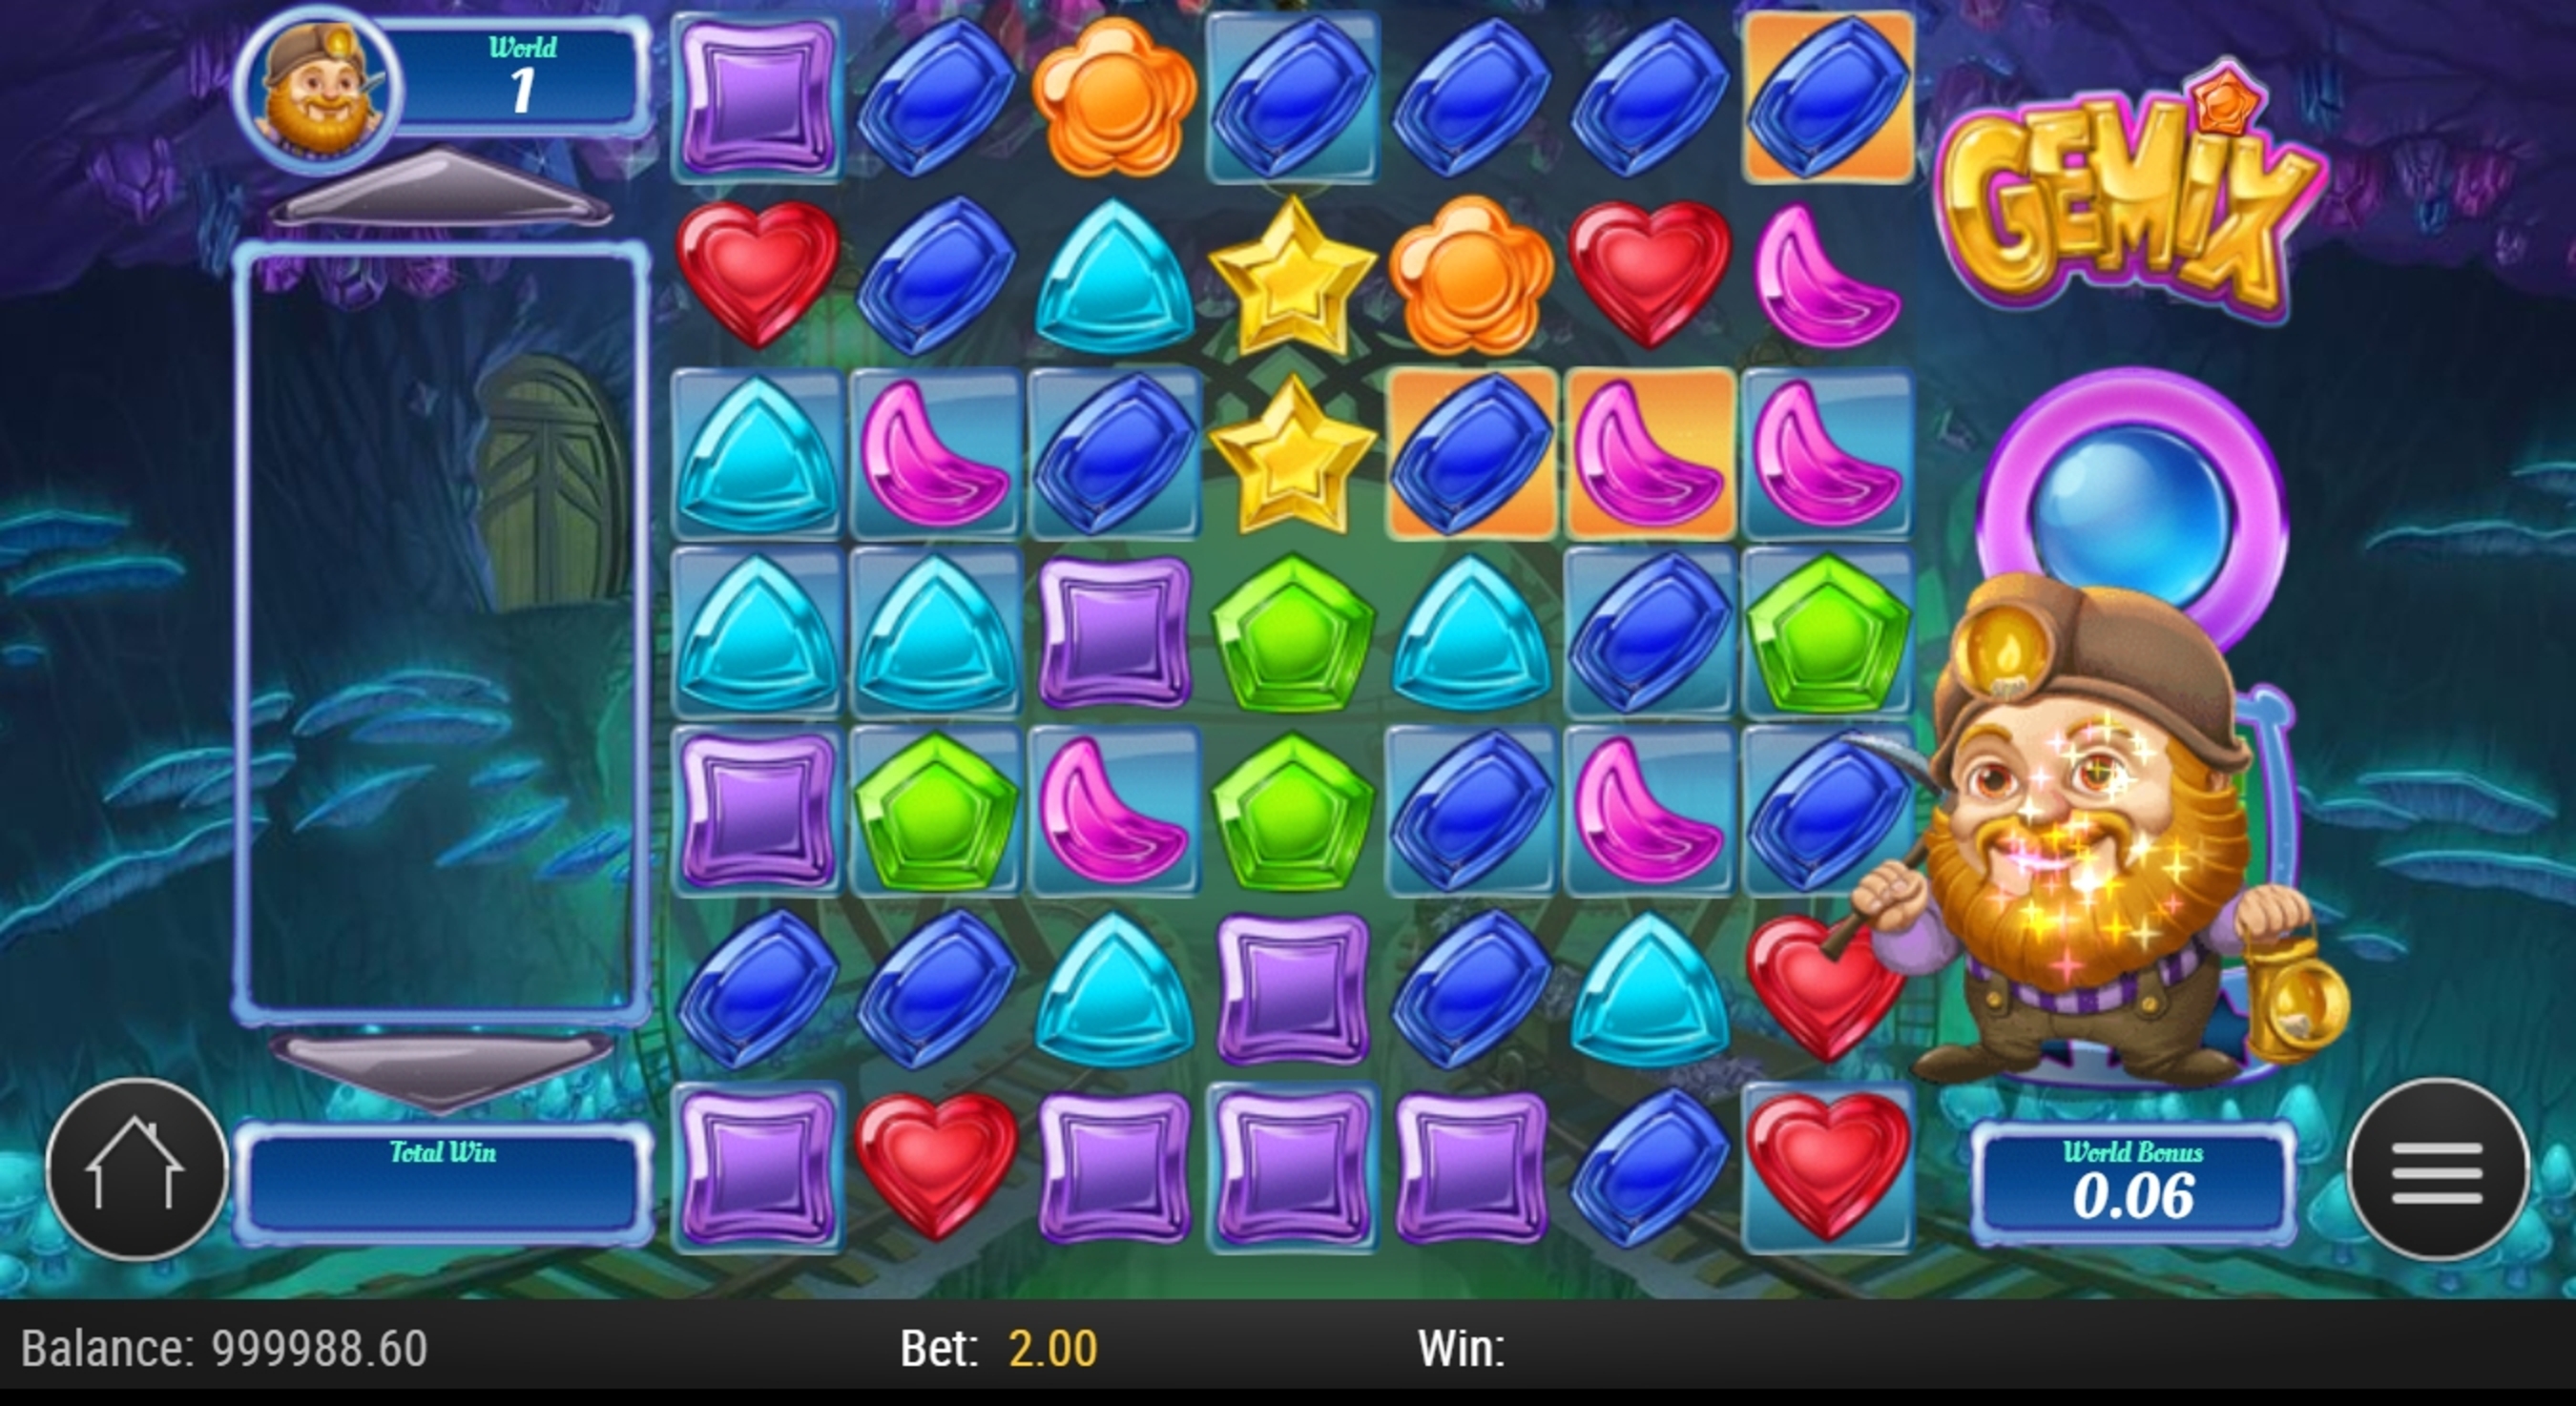 Win Money in Gemix Free Slot Game by Playn GO